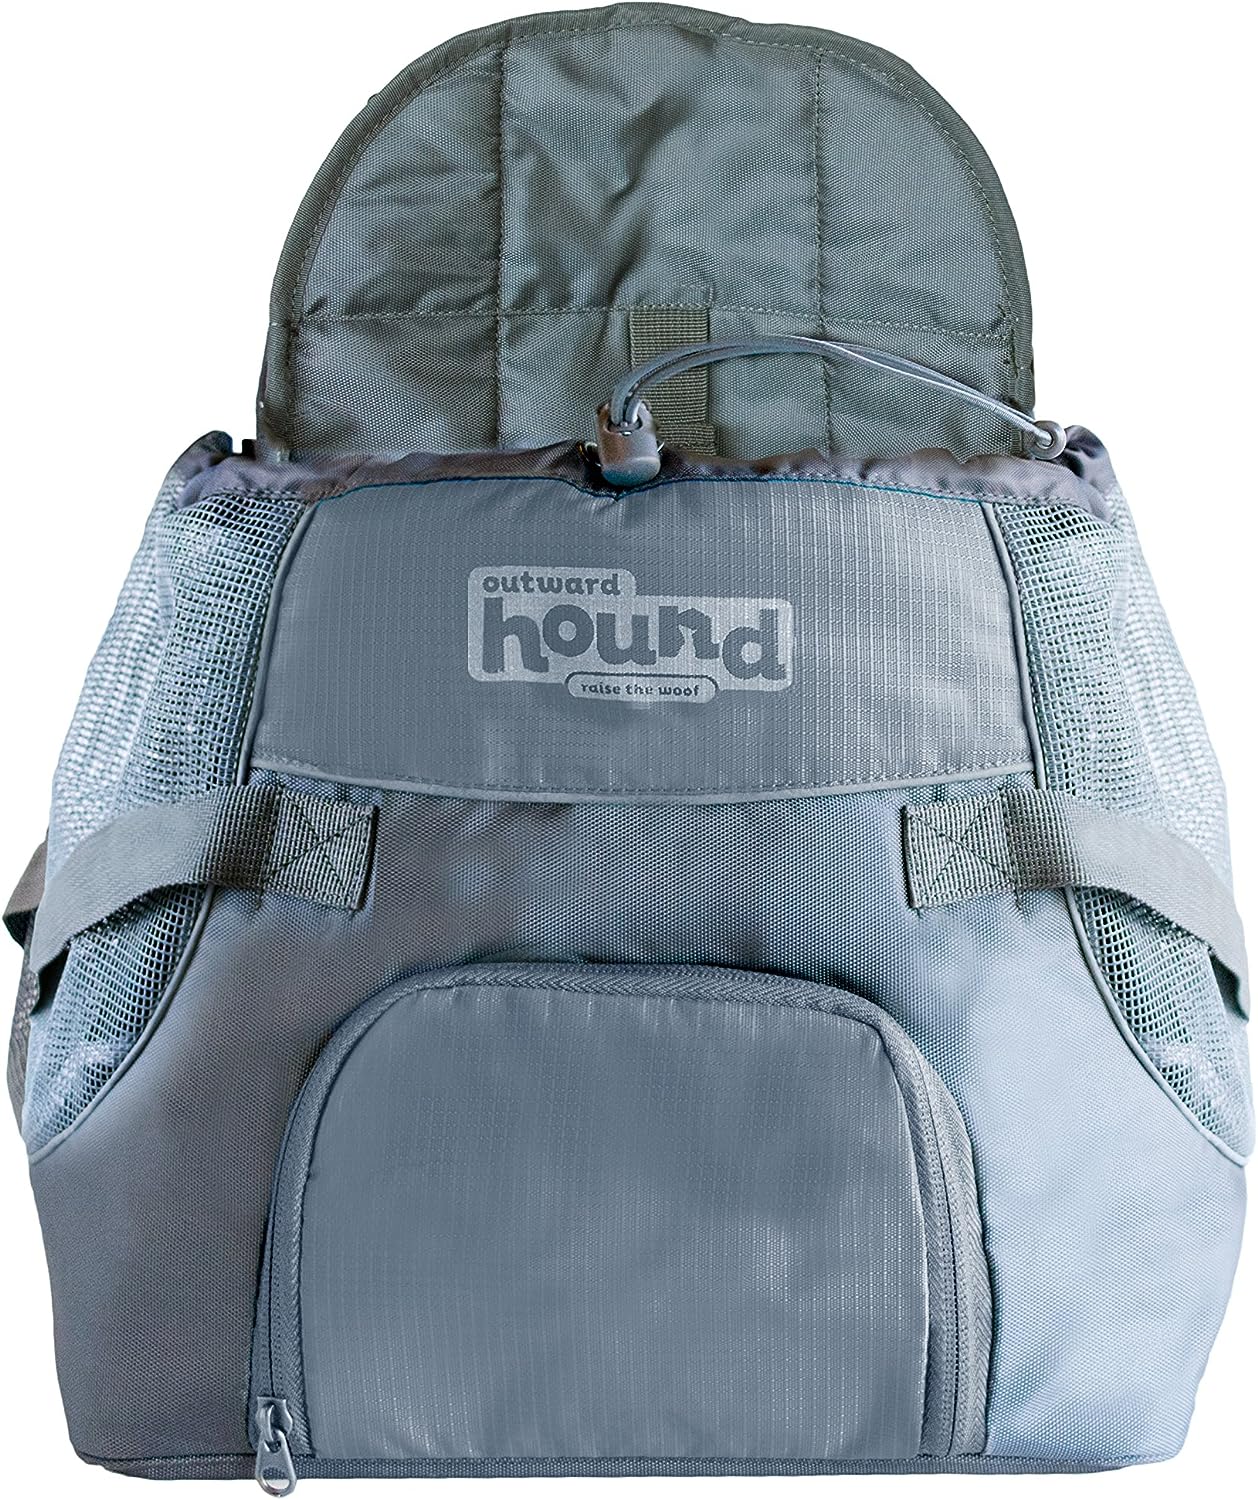 OUTHOUND POOCH POUCH FRONT CARRIER GREY MD